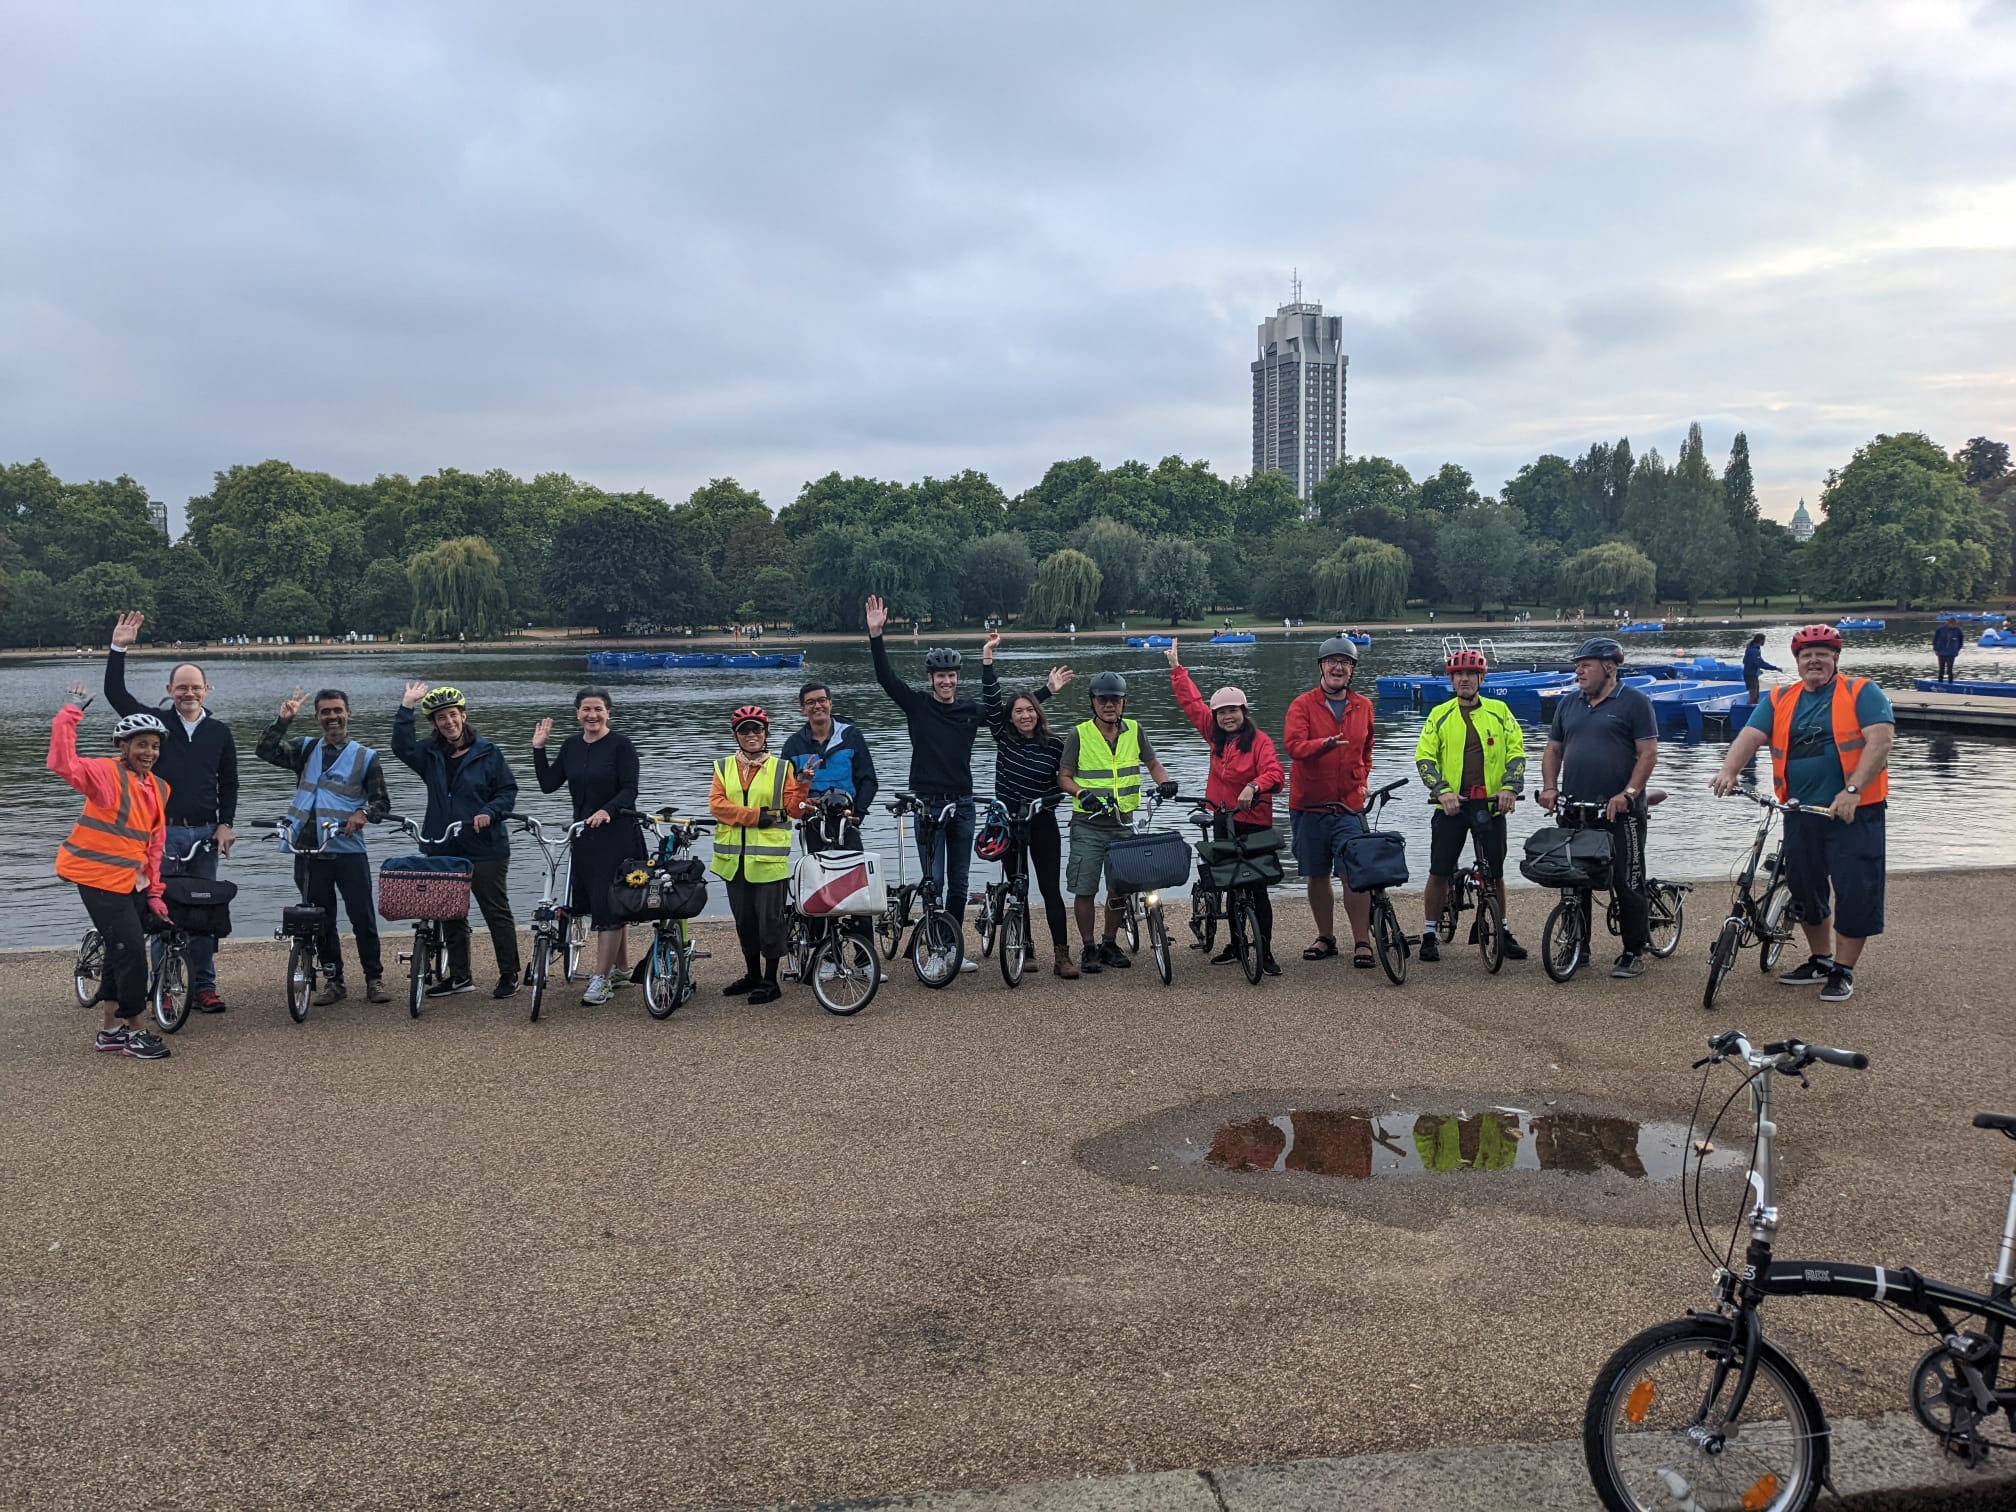 Brompton cyclists at an August social event supported by Bikeworks